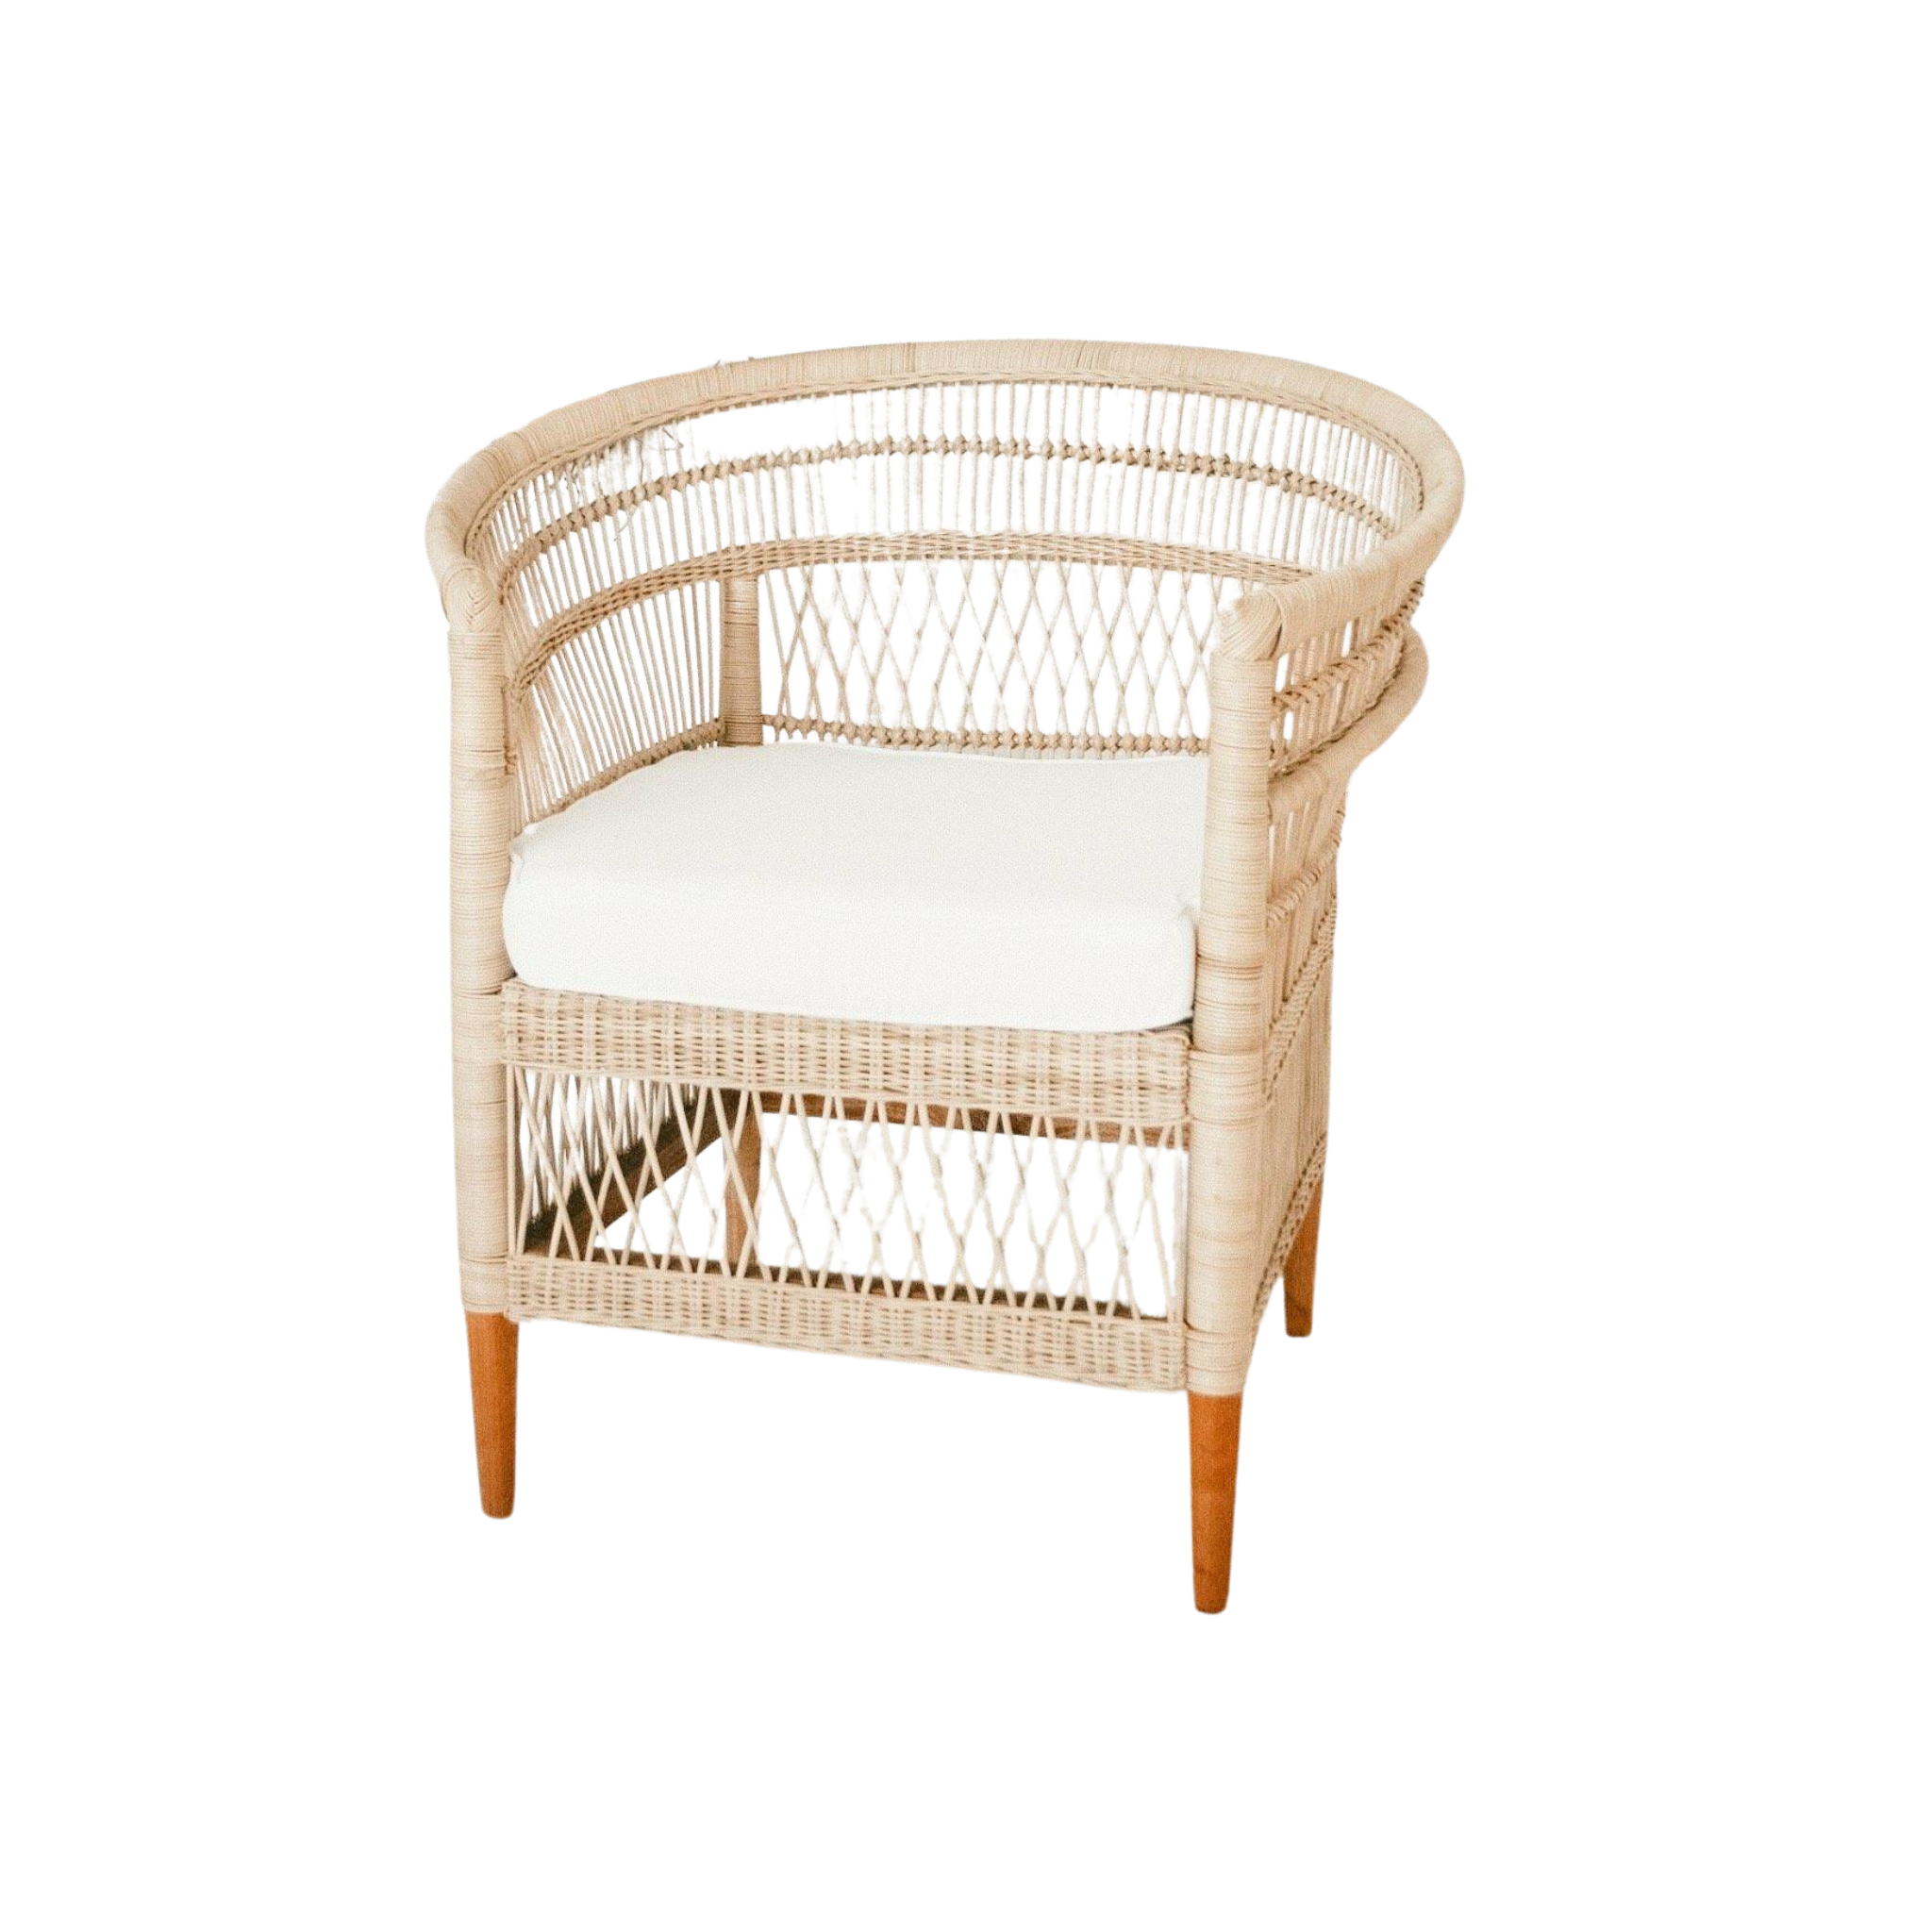 THE BUNGALOW CHAIR